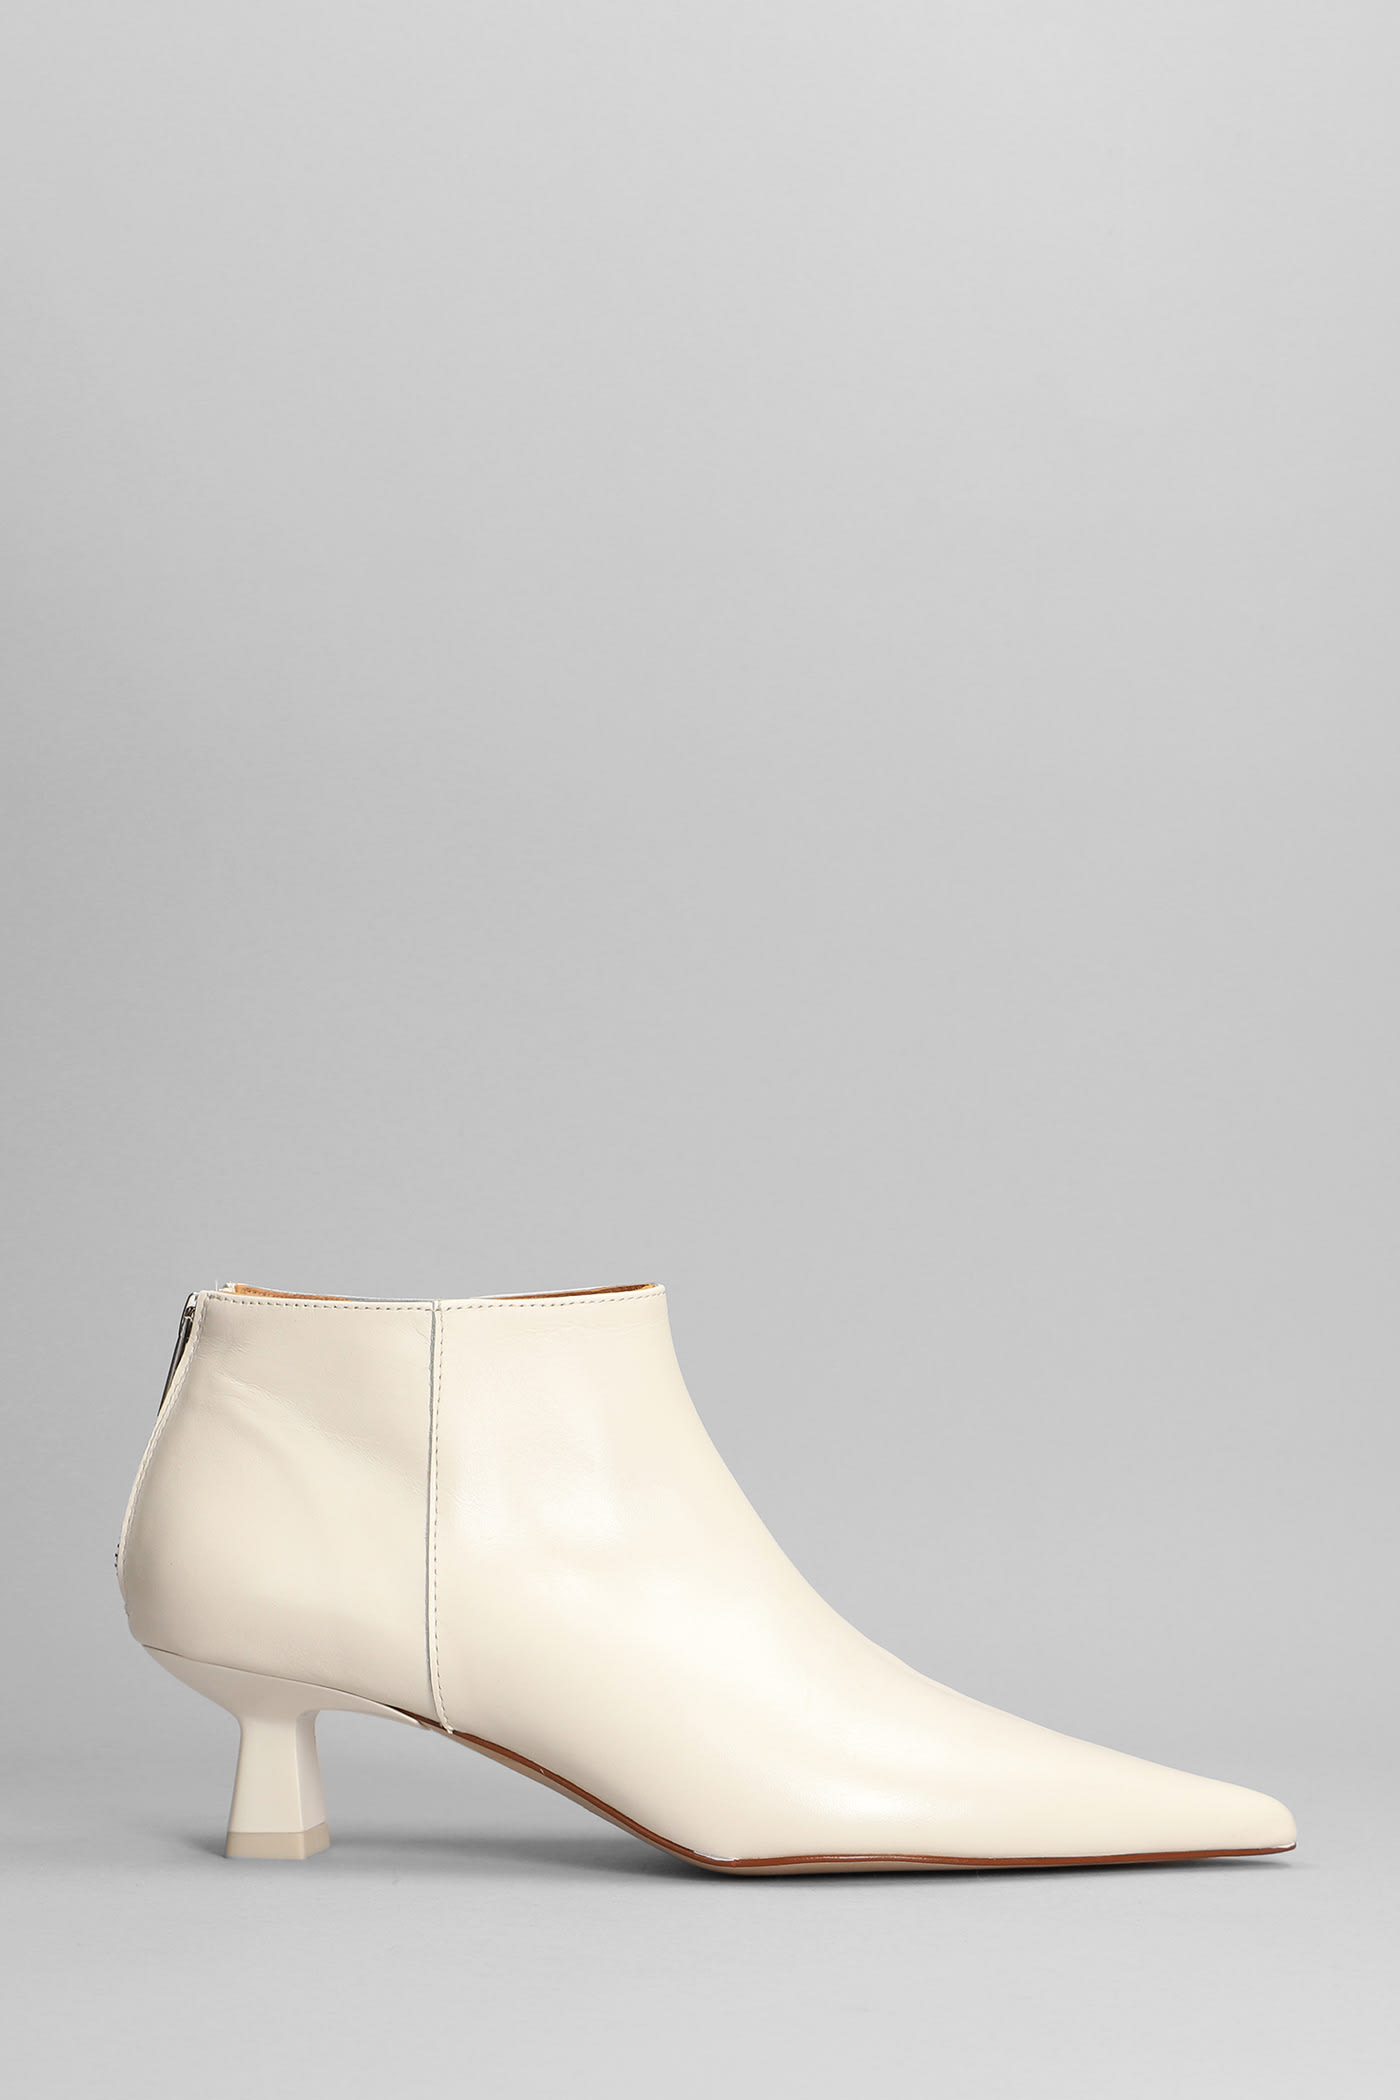 Ganni Low Heels Ankle Boots In Beige Leather